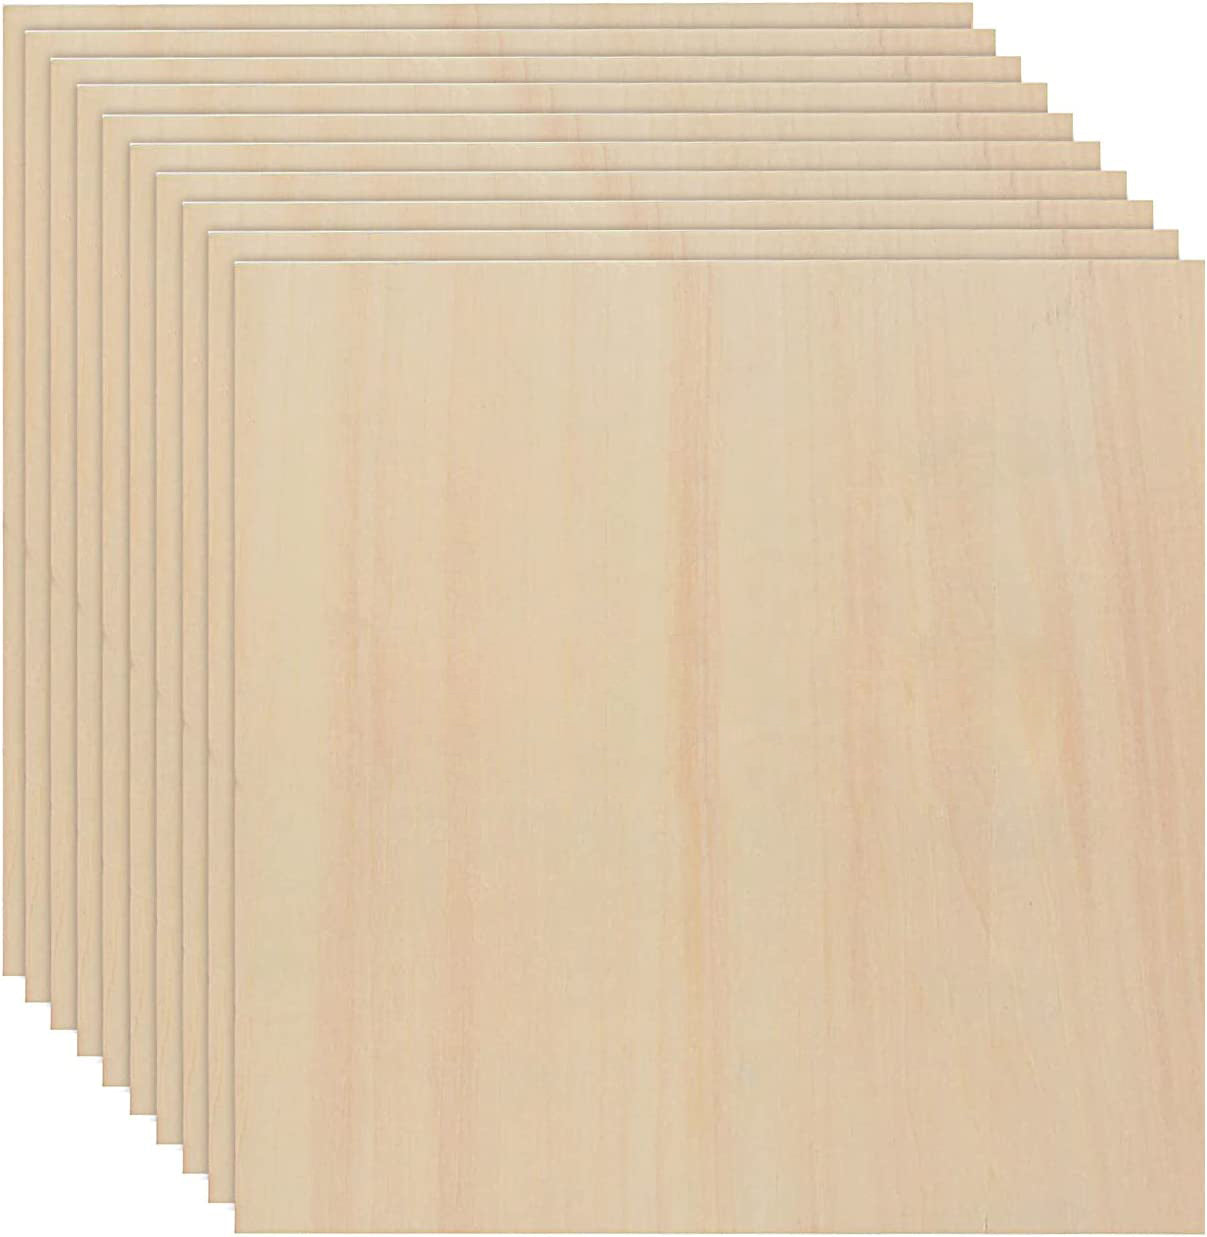  42 Packs Basswood Sheets 1/4 Inch 1/8 Inch 3/16 Inch Plywood  Sheets Thick Wood Sheets 12x12 Inch Unfinished Square Wood Boards For  Crafts Architectural Models DIY Ornaments Drawing Painting Engraving